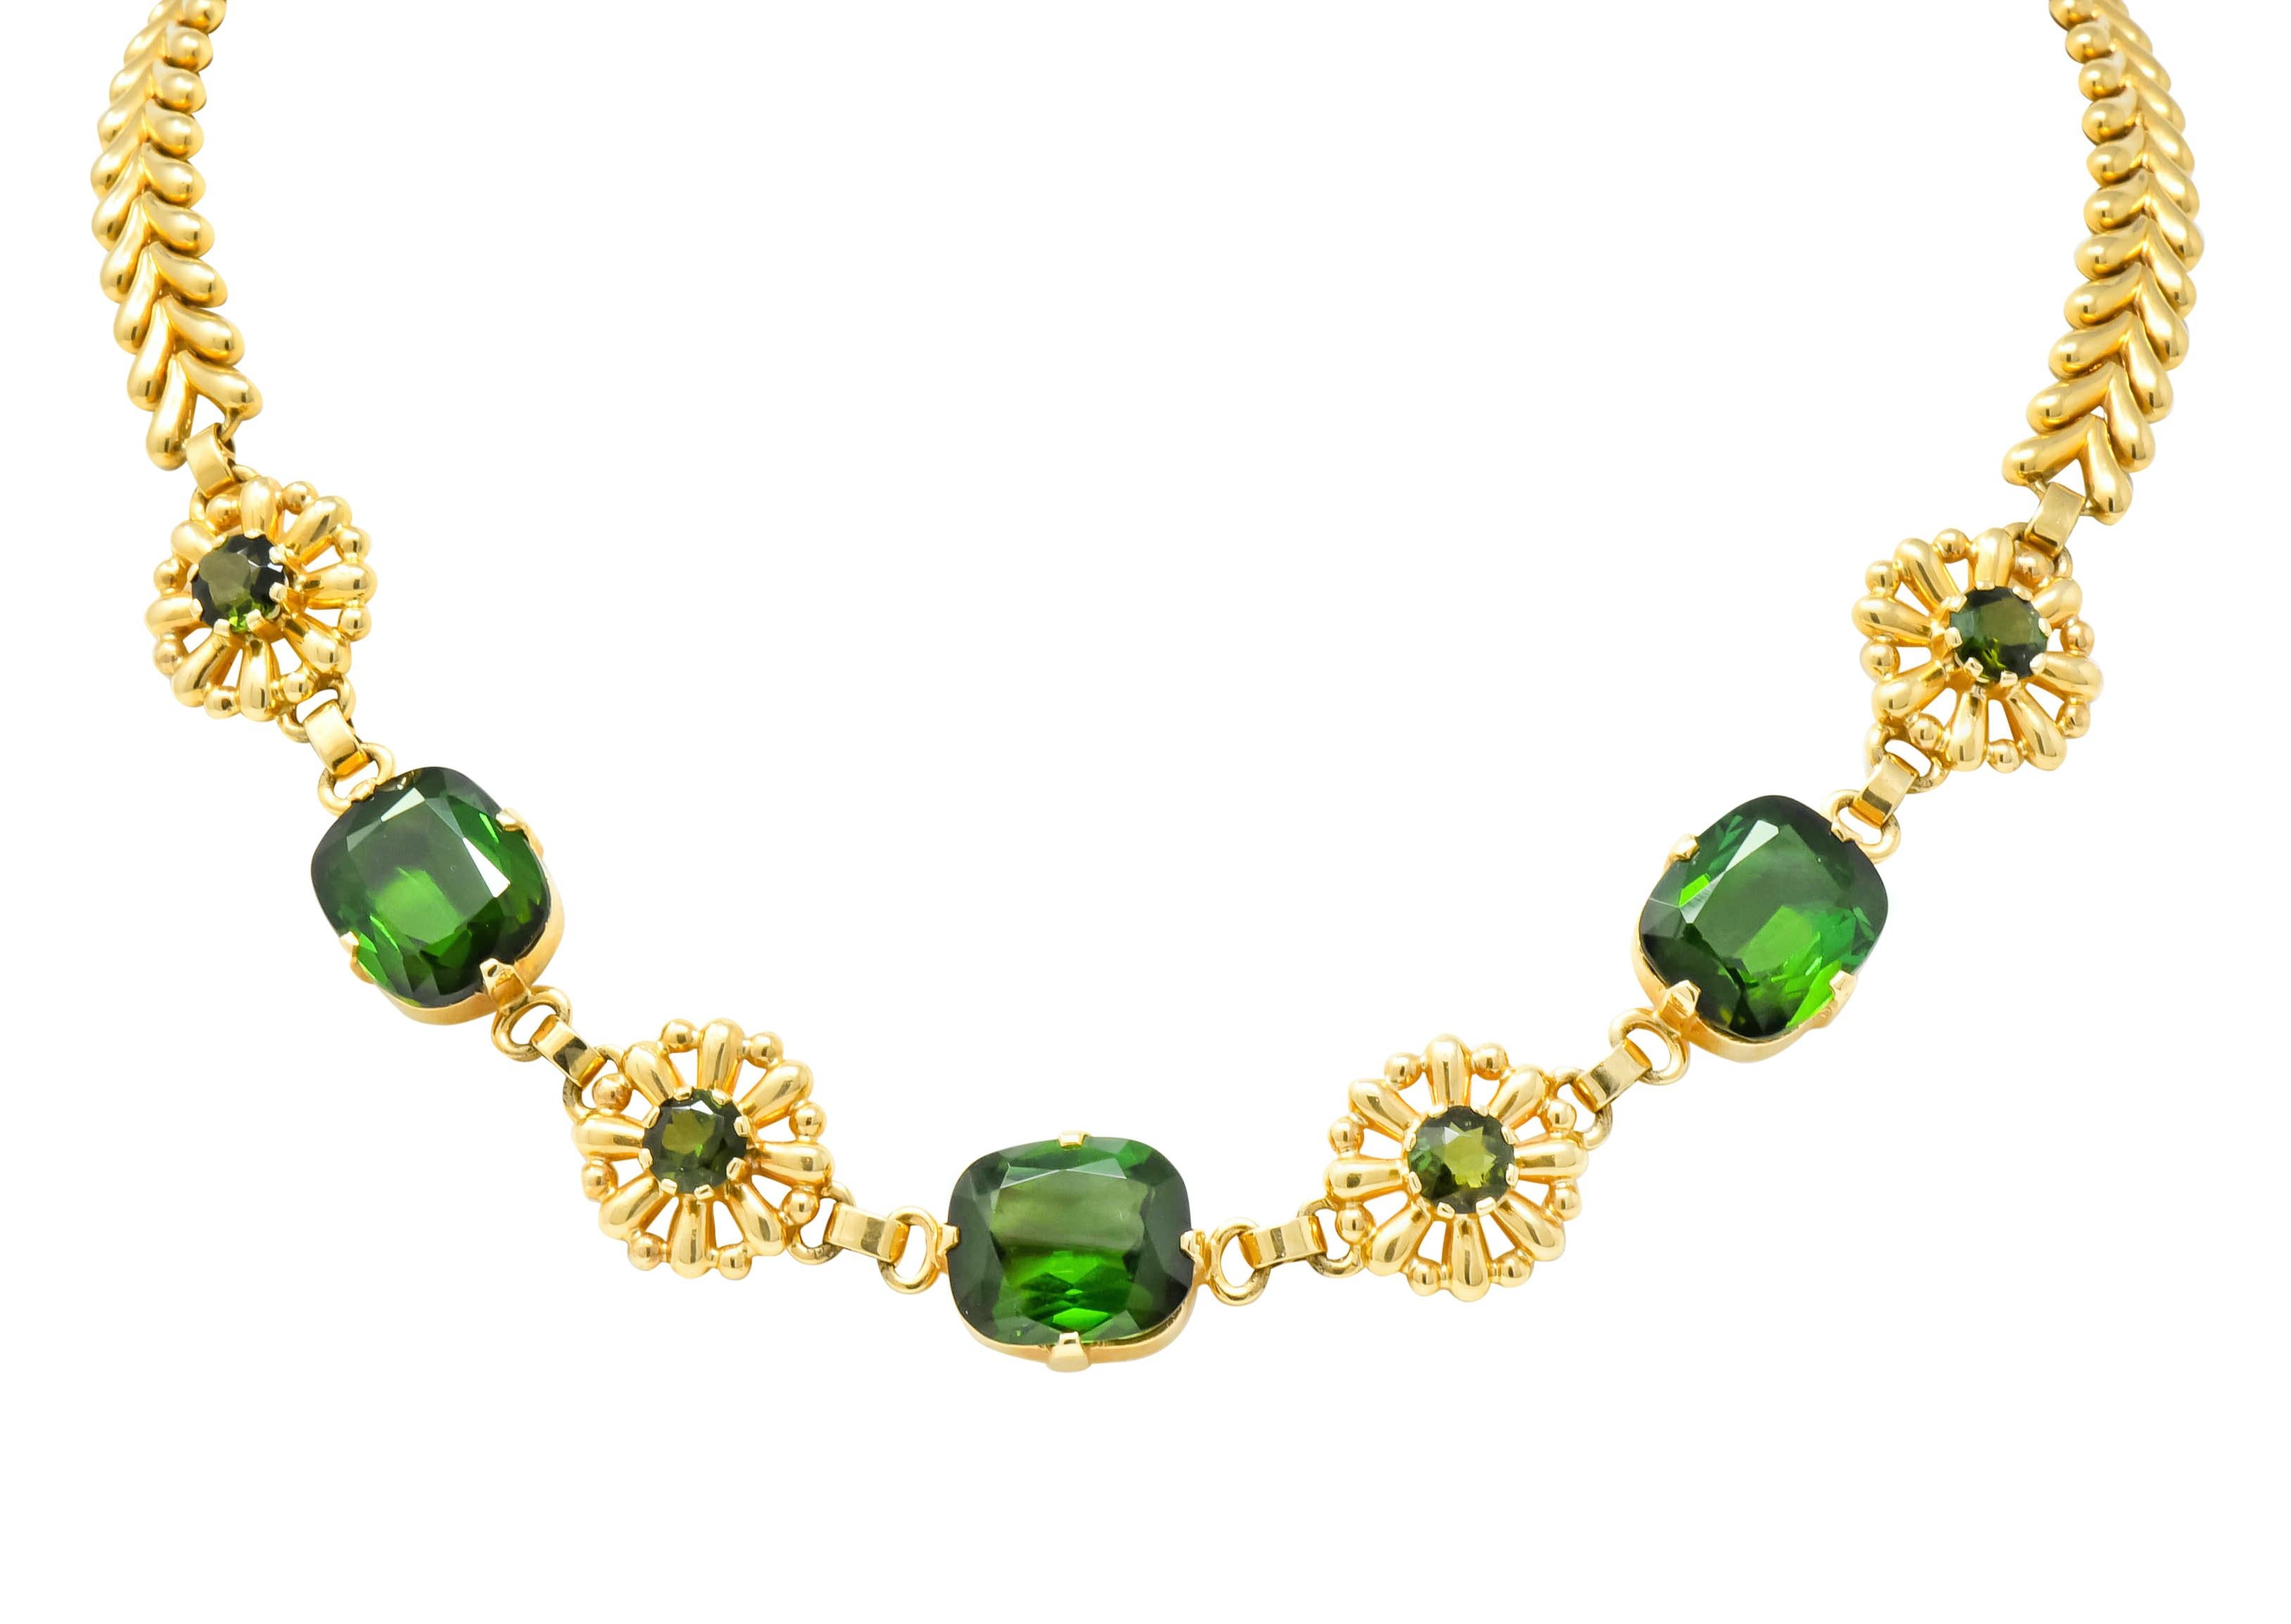 Bracelet and Necklace both feature highly polished flower links centering round cut tourmaline alternating with prong set mixed cushion cut tourmaline

Tourmaline is transparent and a deeply saturated forest green weighing in total approximately